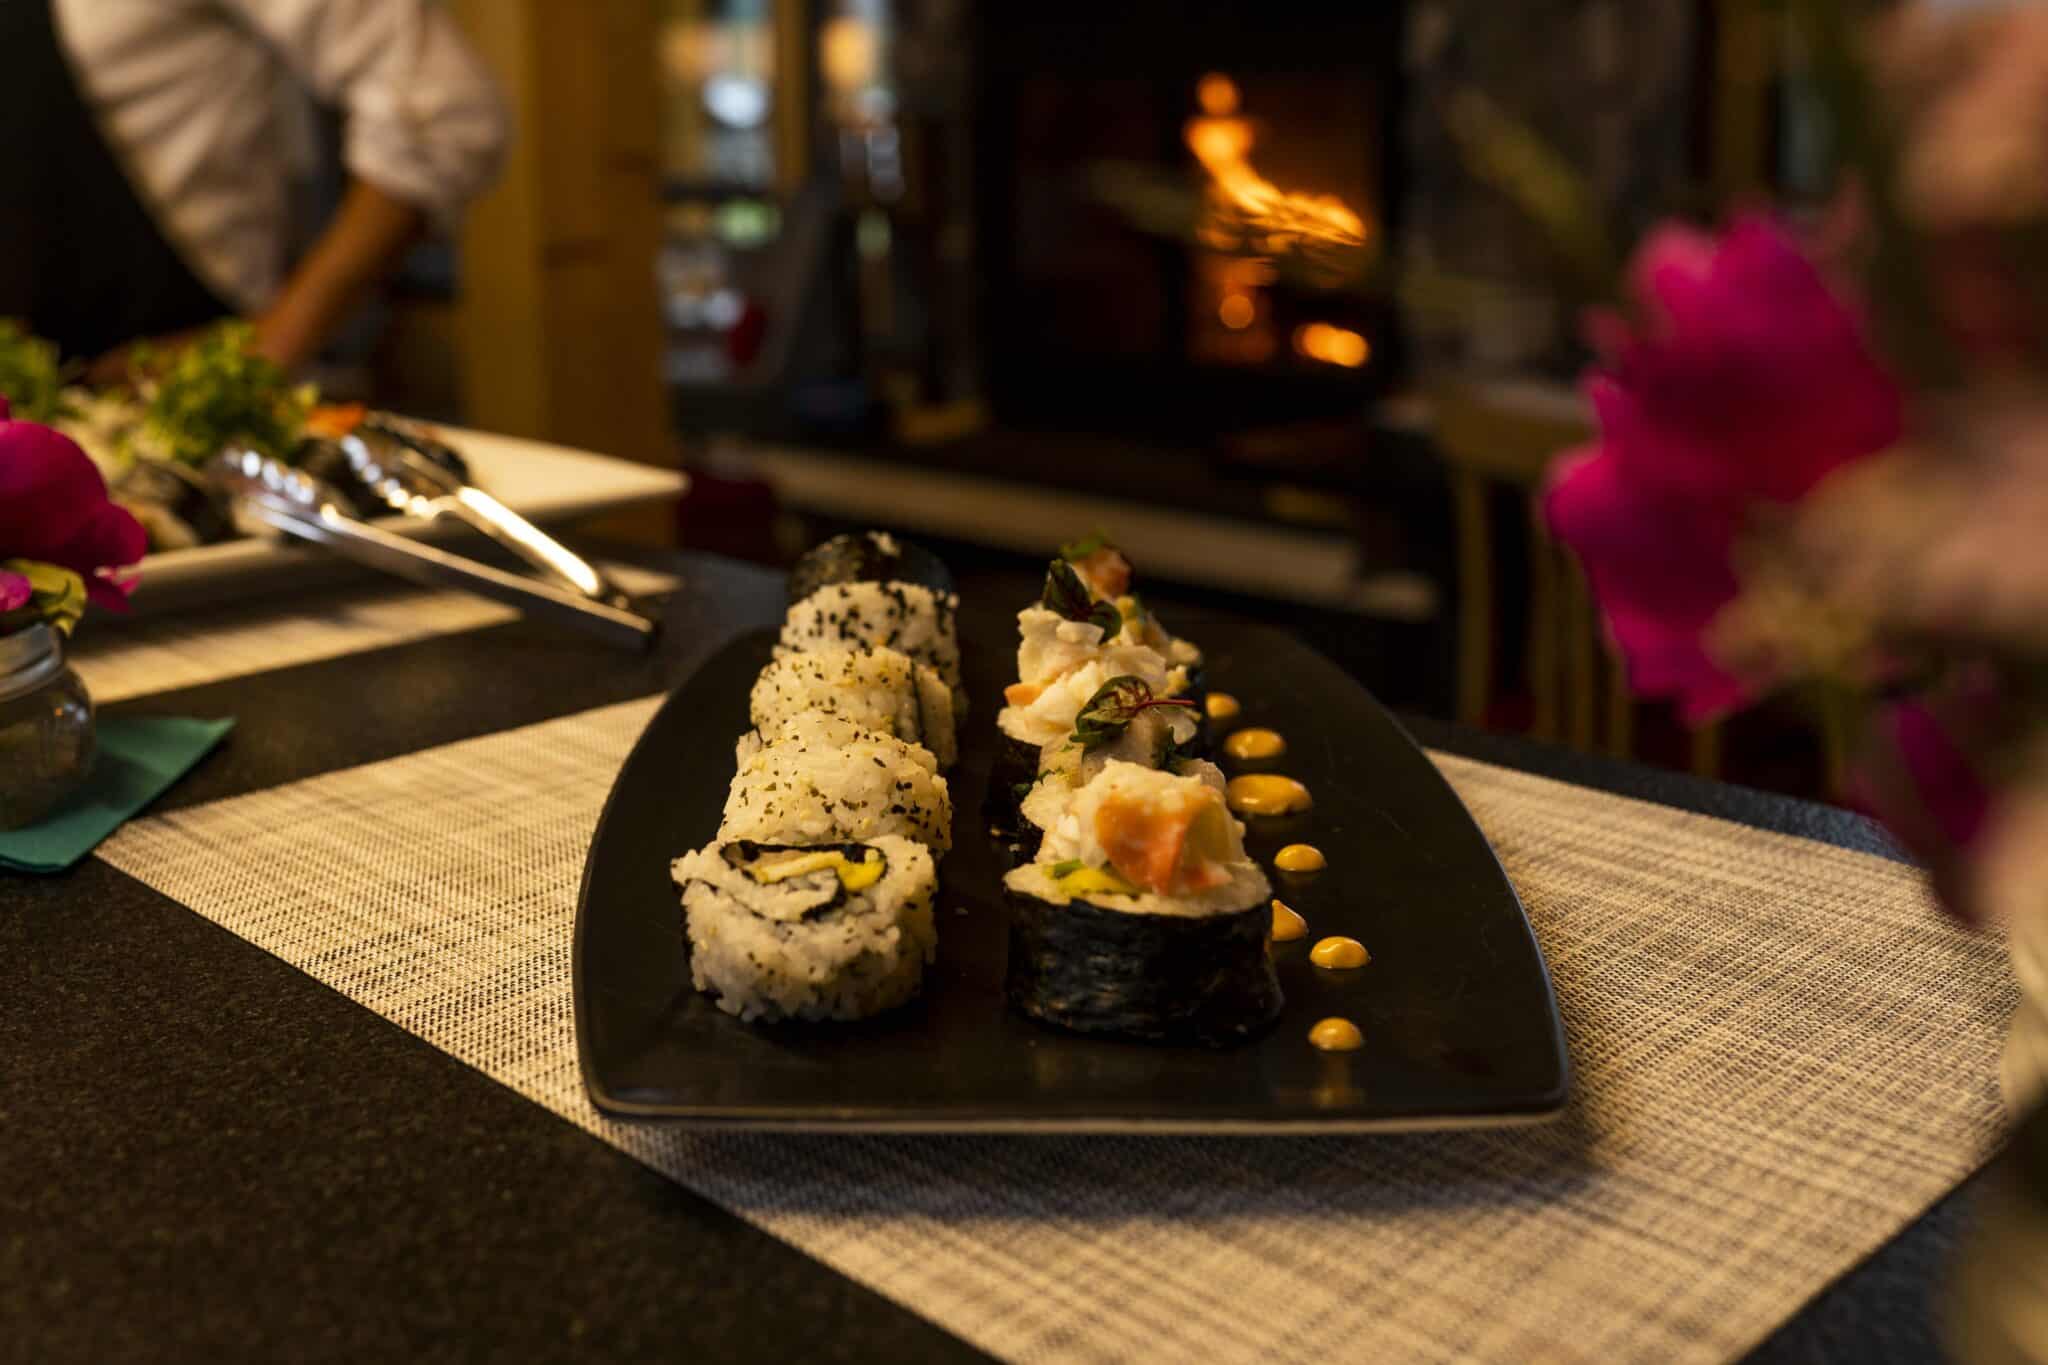 sushi plated in front of the fire